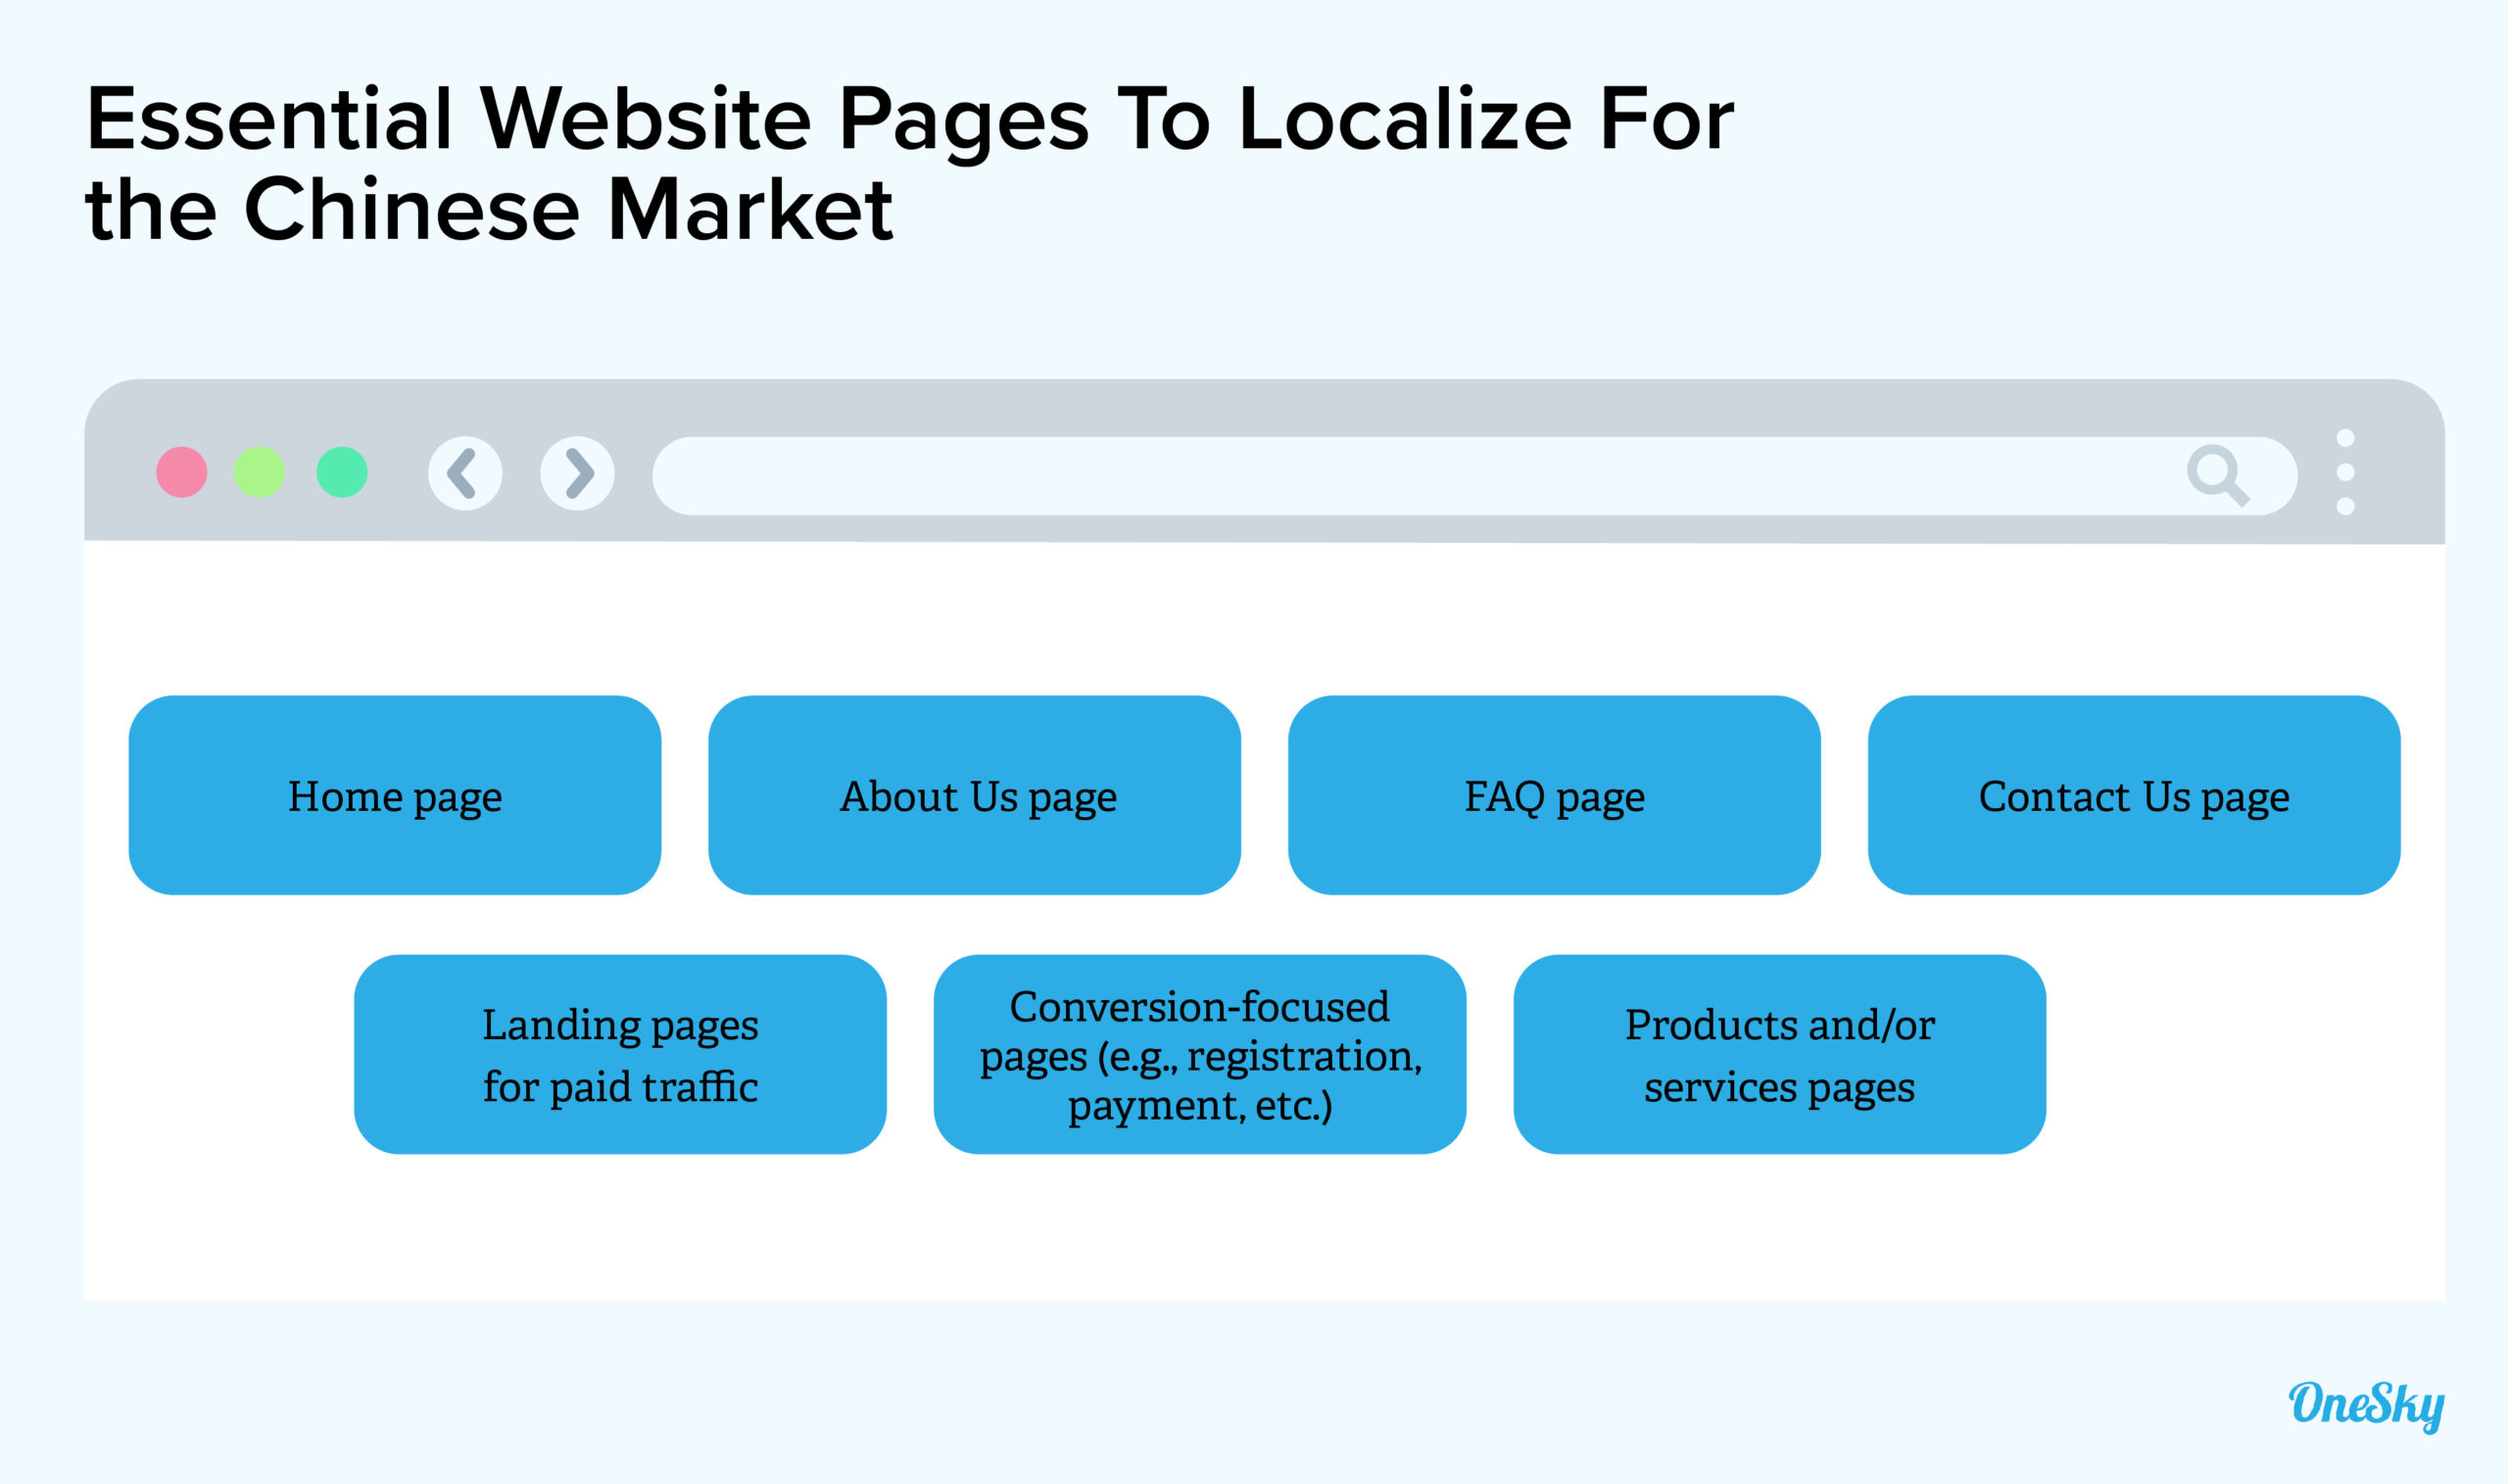 How To Localize Your Website For the Chinese Market